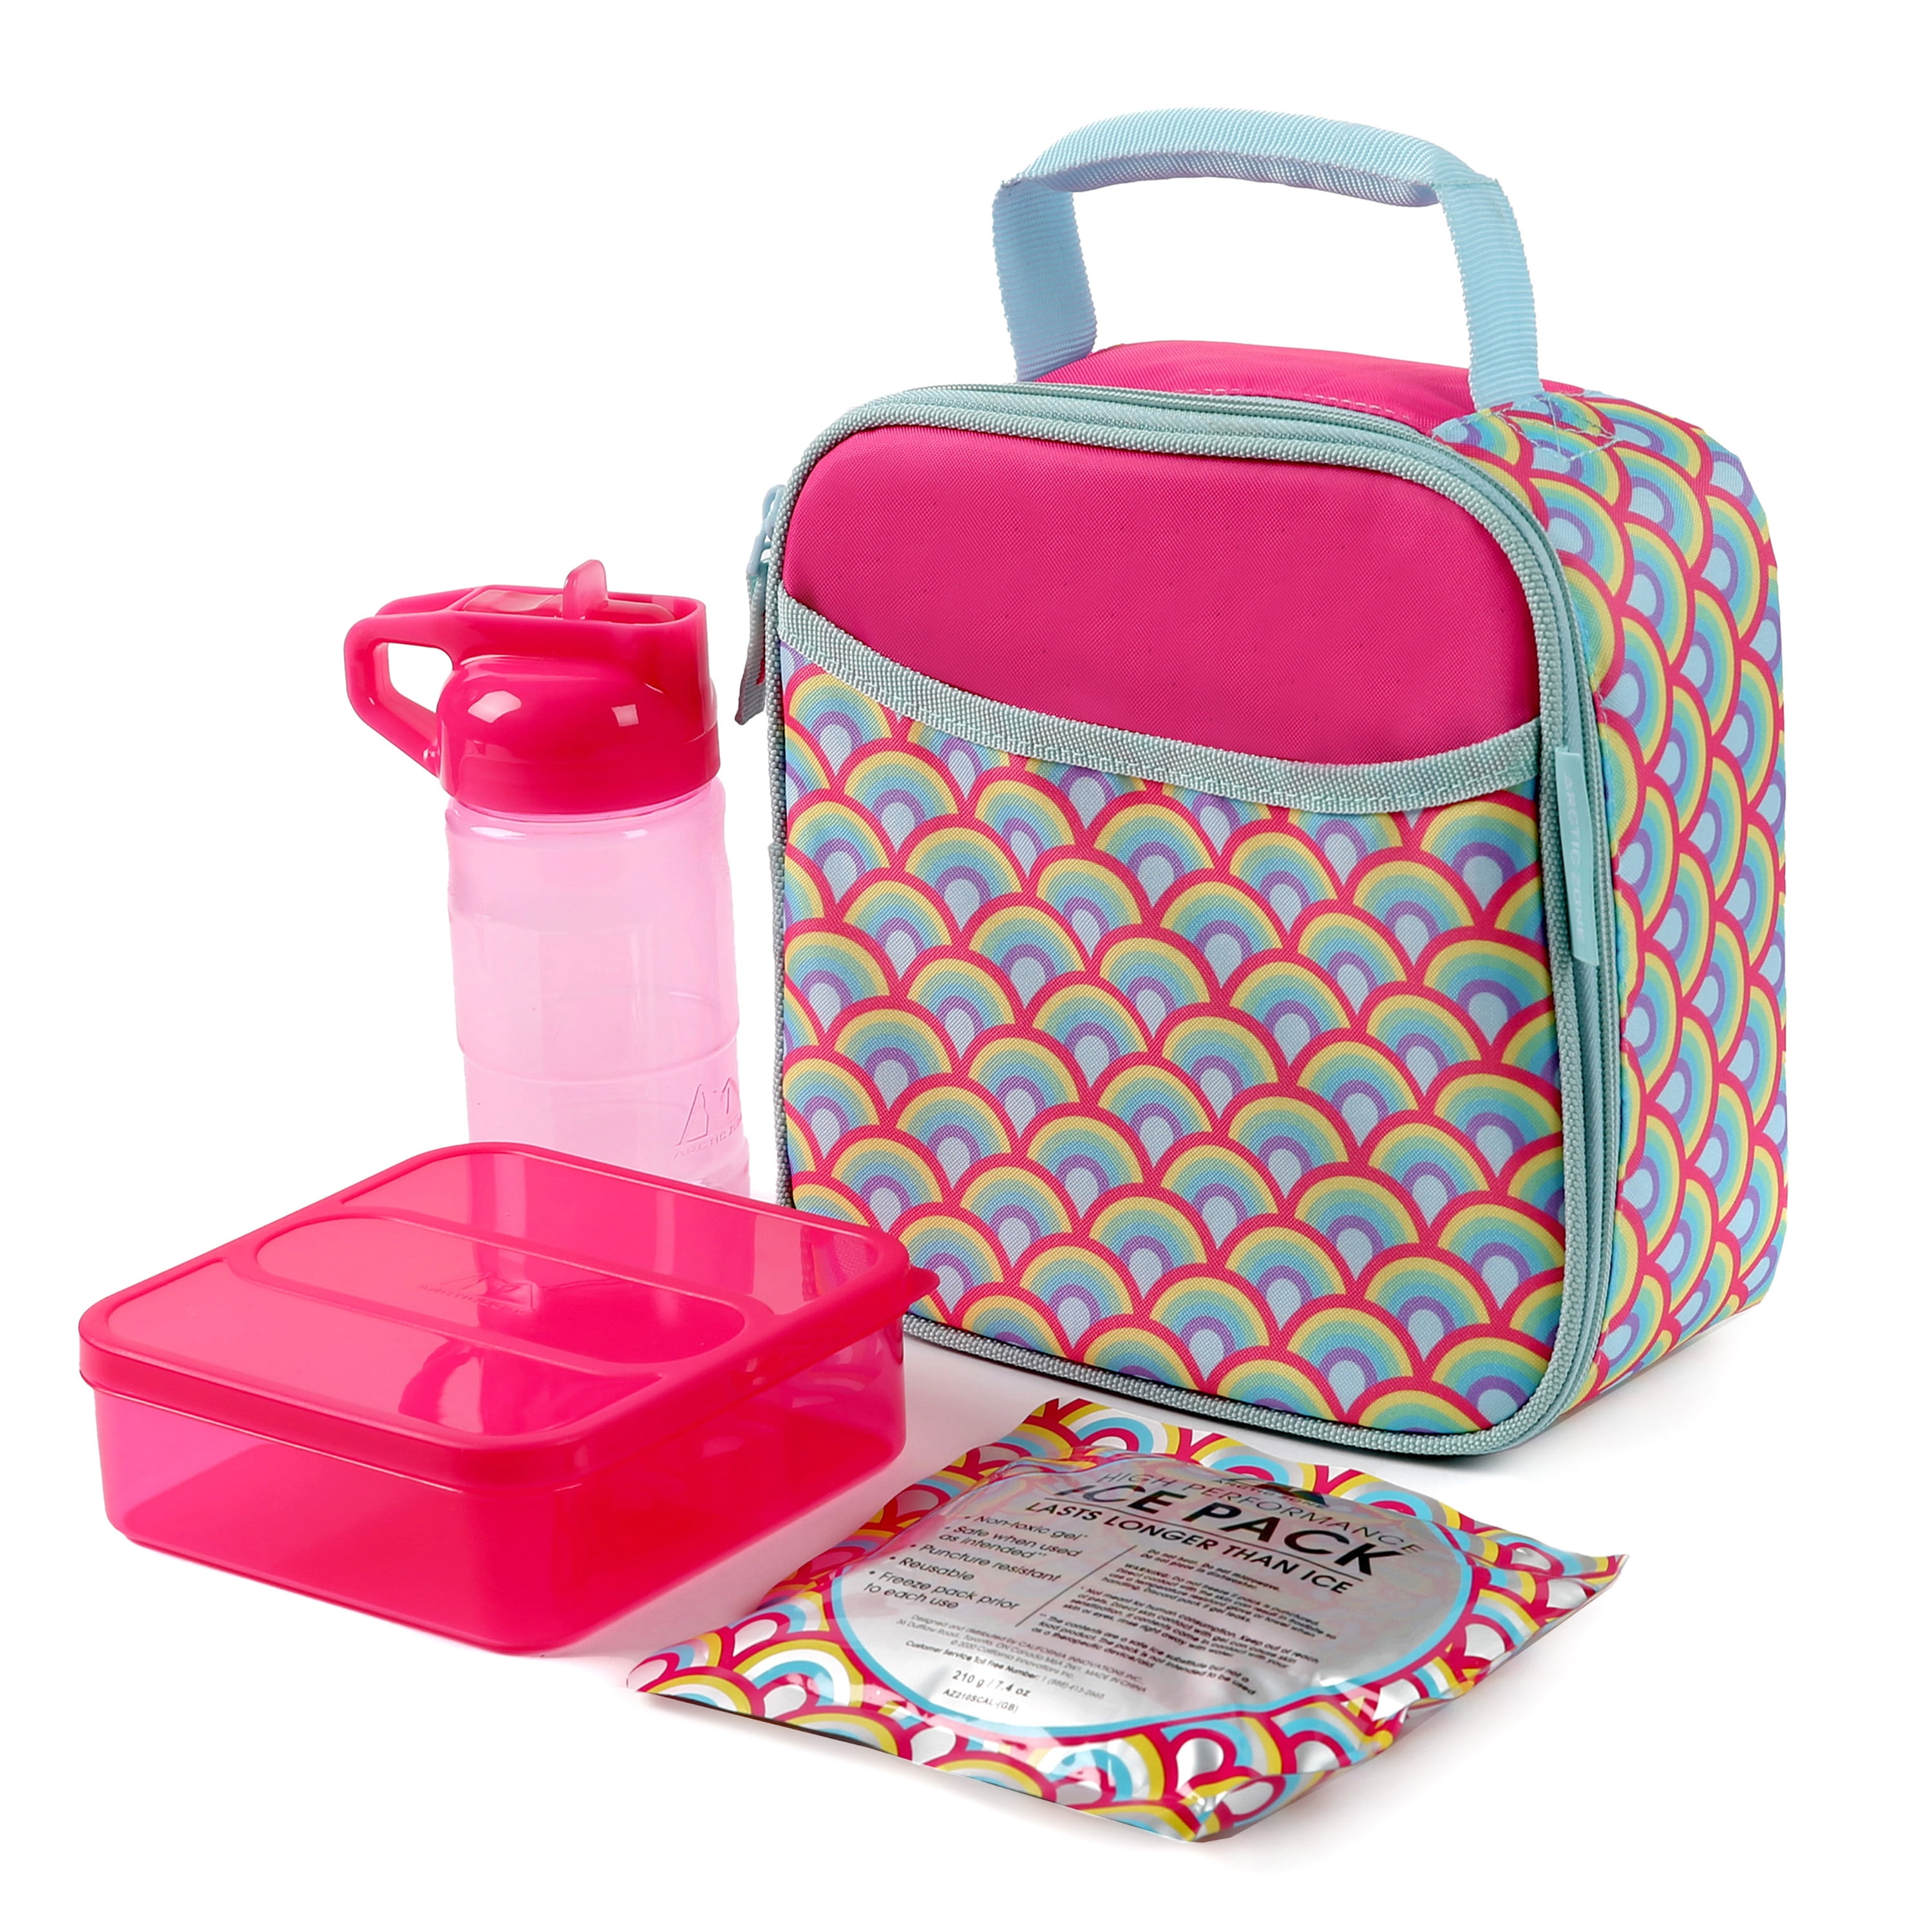 Ouryec Girls Rainbow Insulated Lunch Box, Aluminum, 11.1 in x 8.6 in x 4.3  in